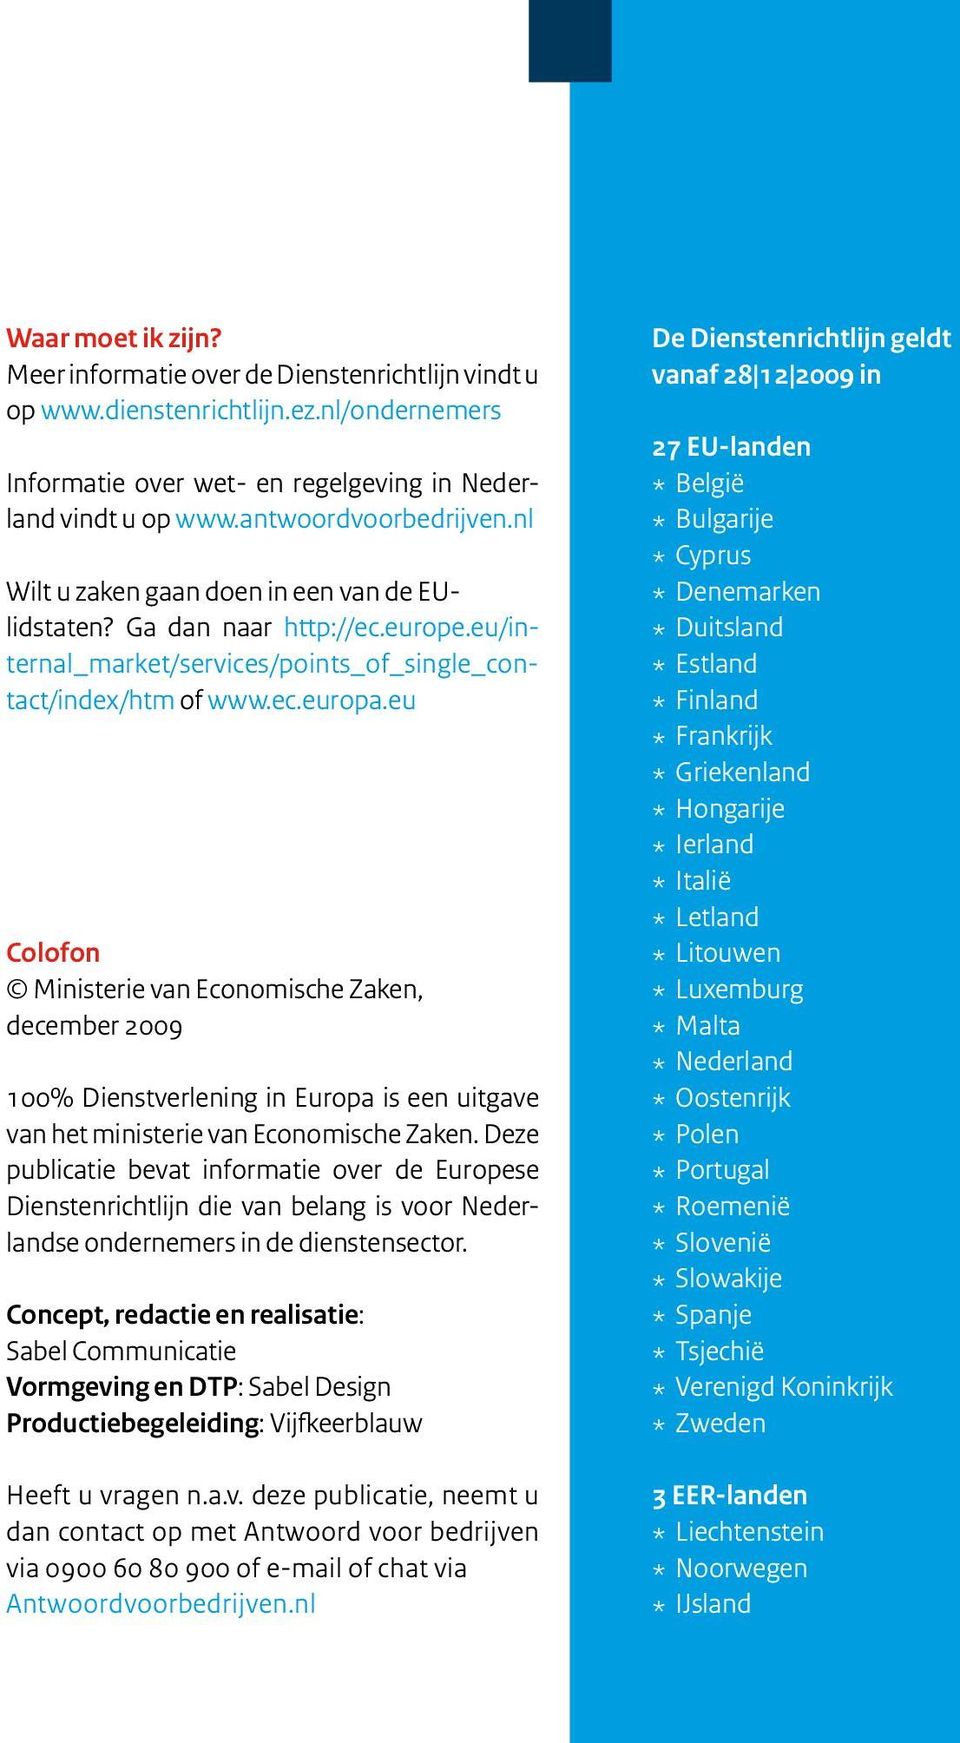 eu/internal_market/services/points_of_single_contact/index/htm of www.ec.europa.